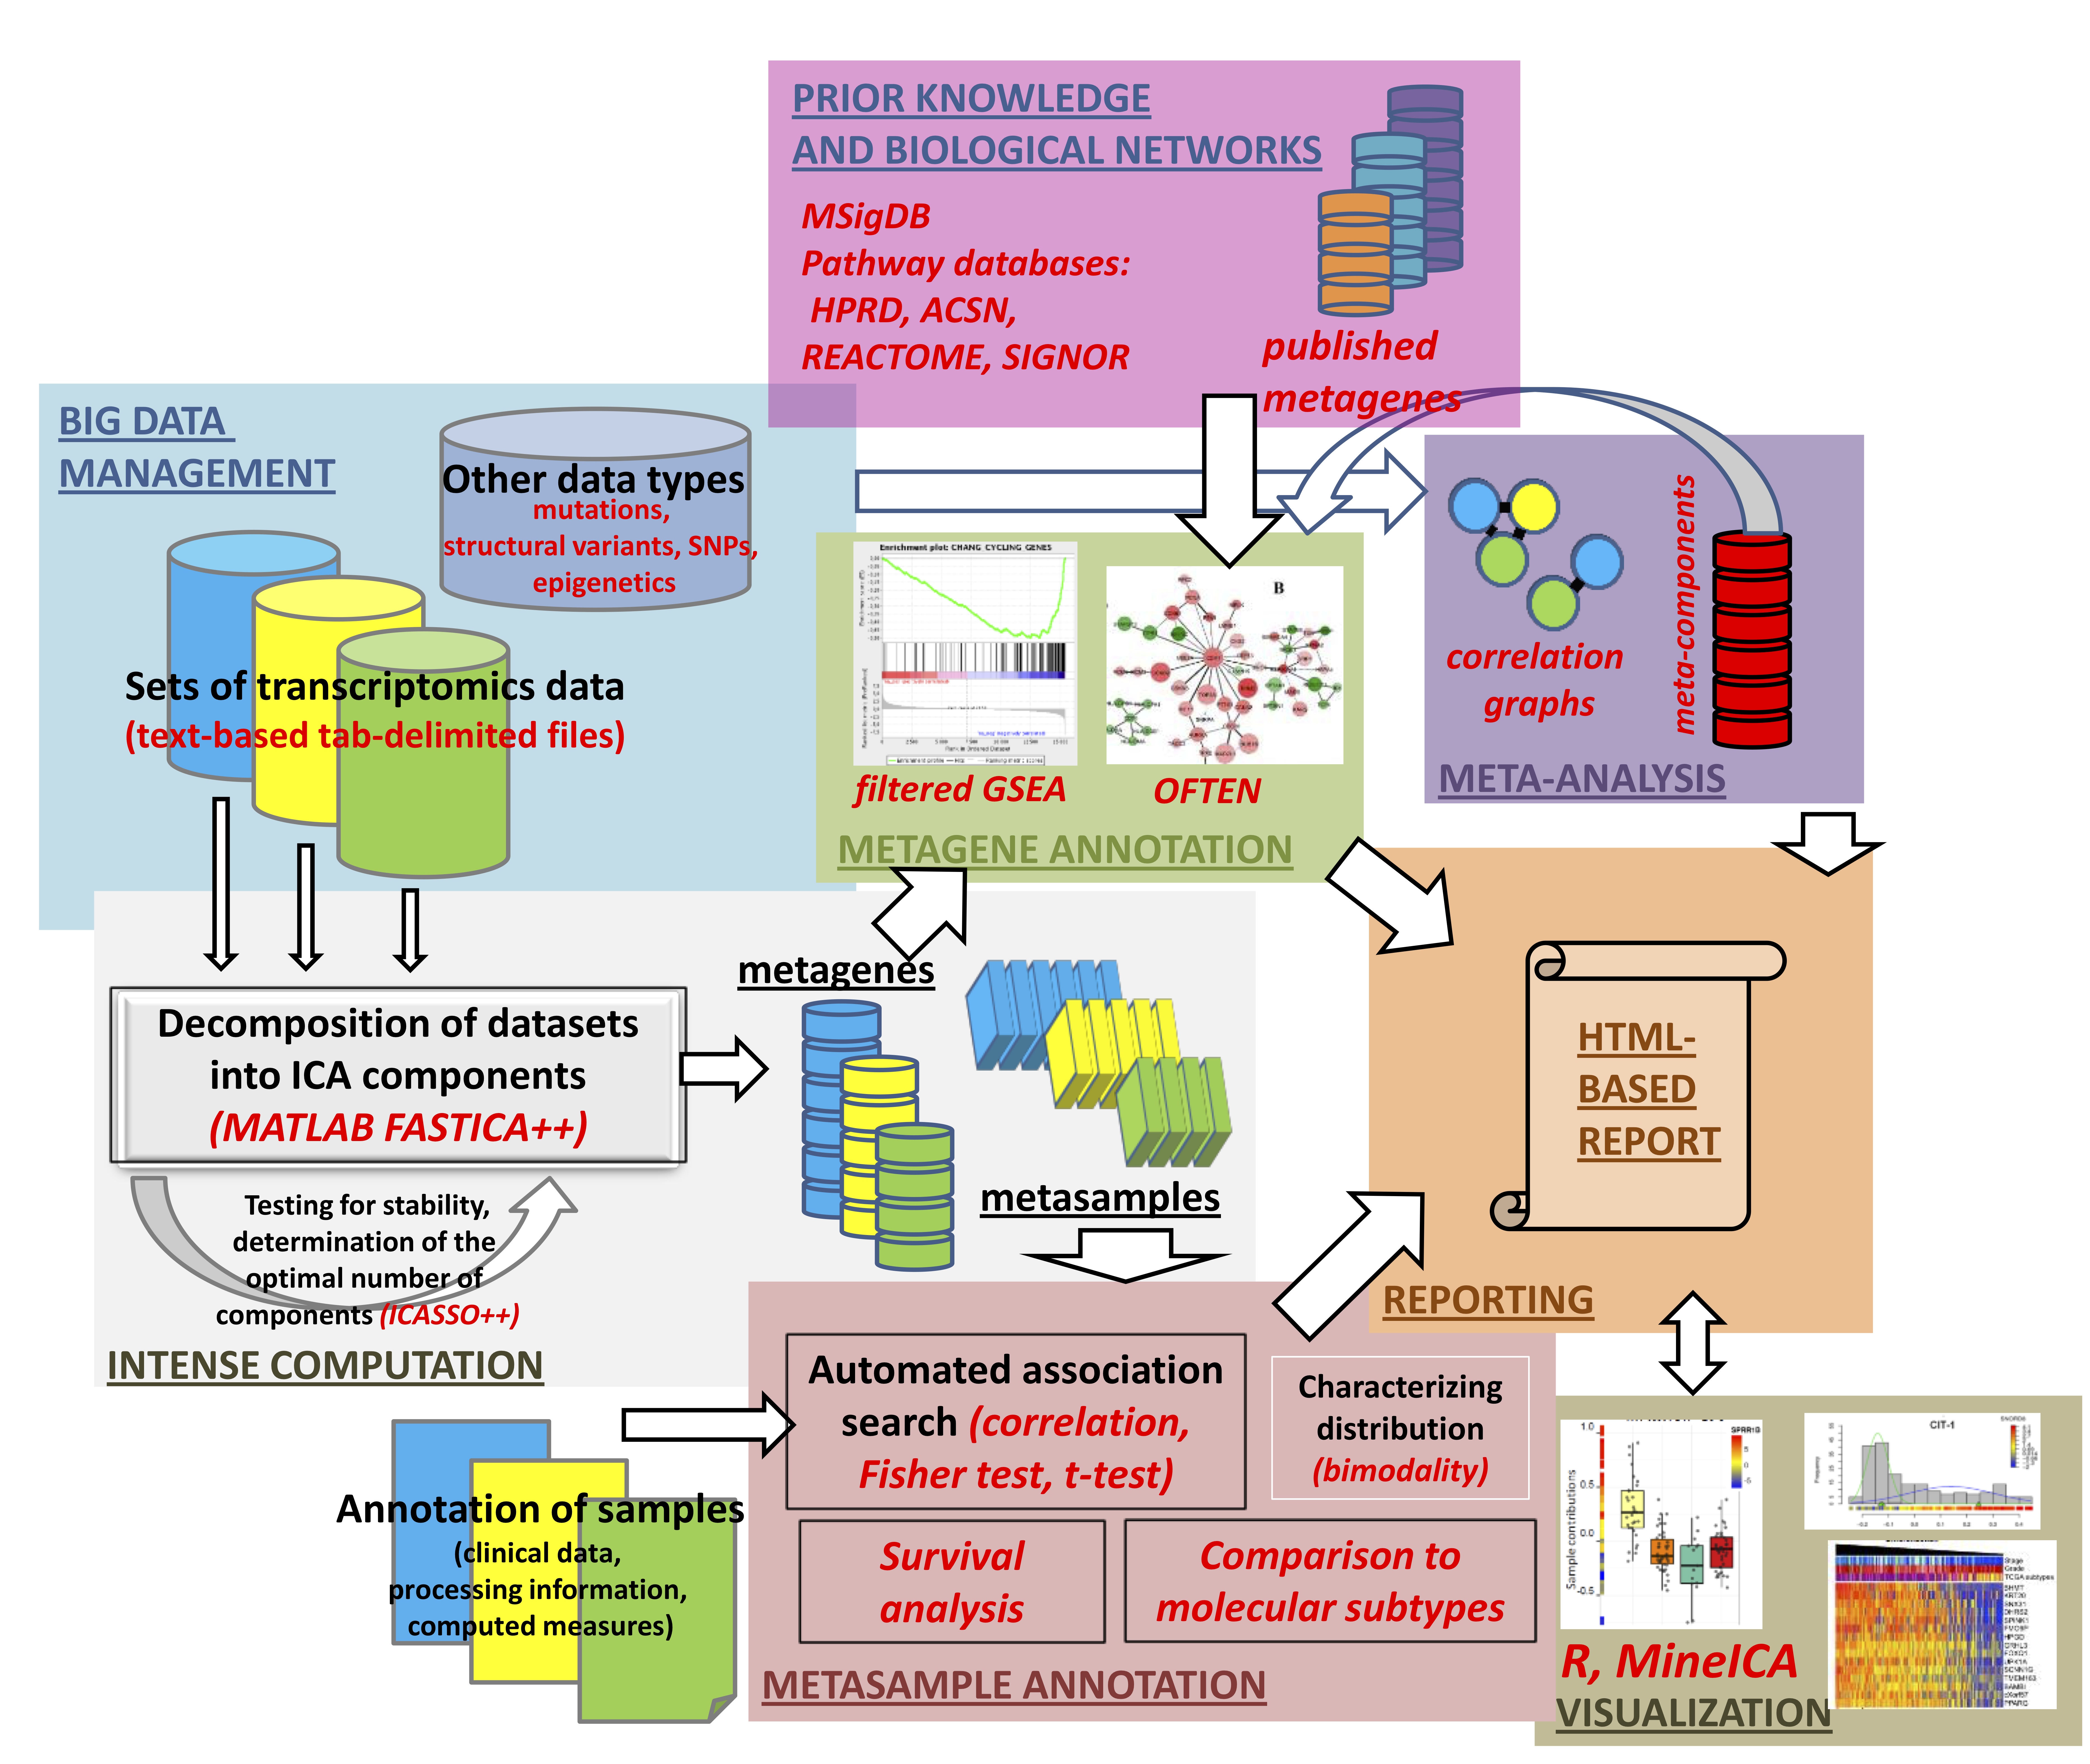 General architecture of the BIODICA data analysis pipeline. Boxes of different colors separates different functional modules of the system. Described functionality corresponds to the BIODICA version 1.0, source: https://github.com/LabBandSB/BIODICA/blob/master/doc/ICA_pipeline_general_description_v0.9.pdf